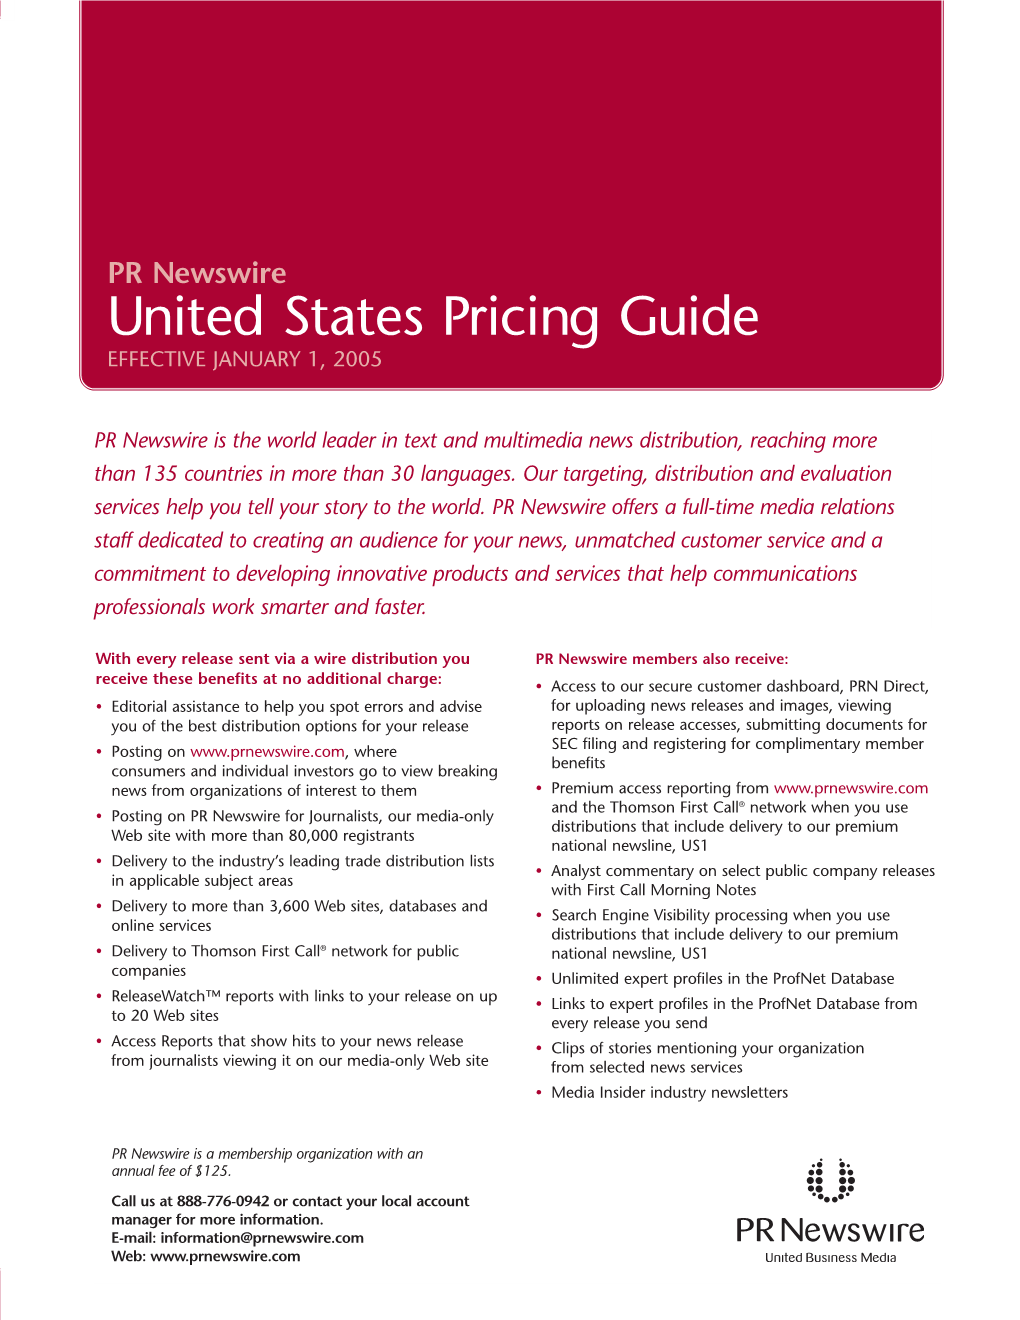 PR Newswire United States Pricing Guide EFFECTIVE JANUARY 1, 2005